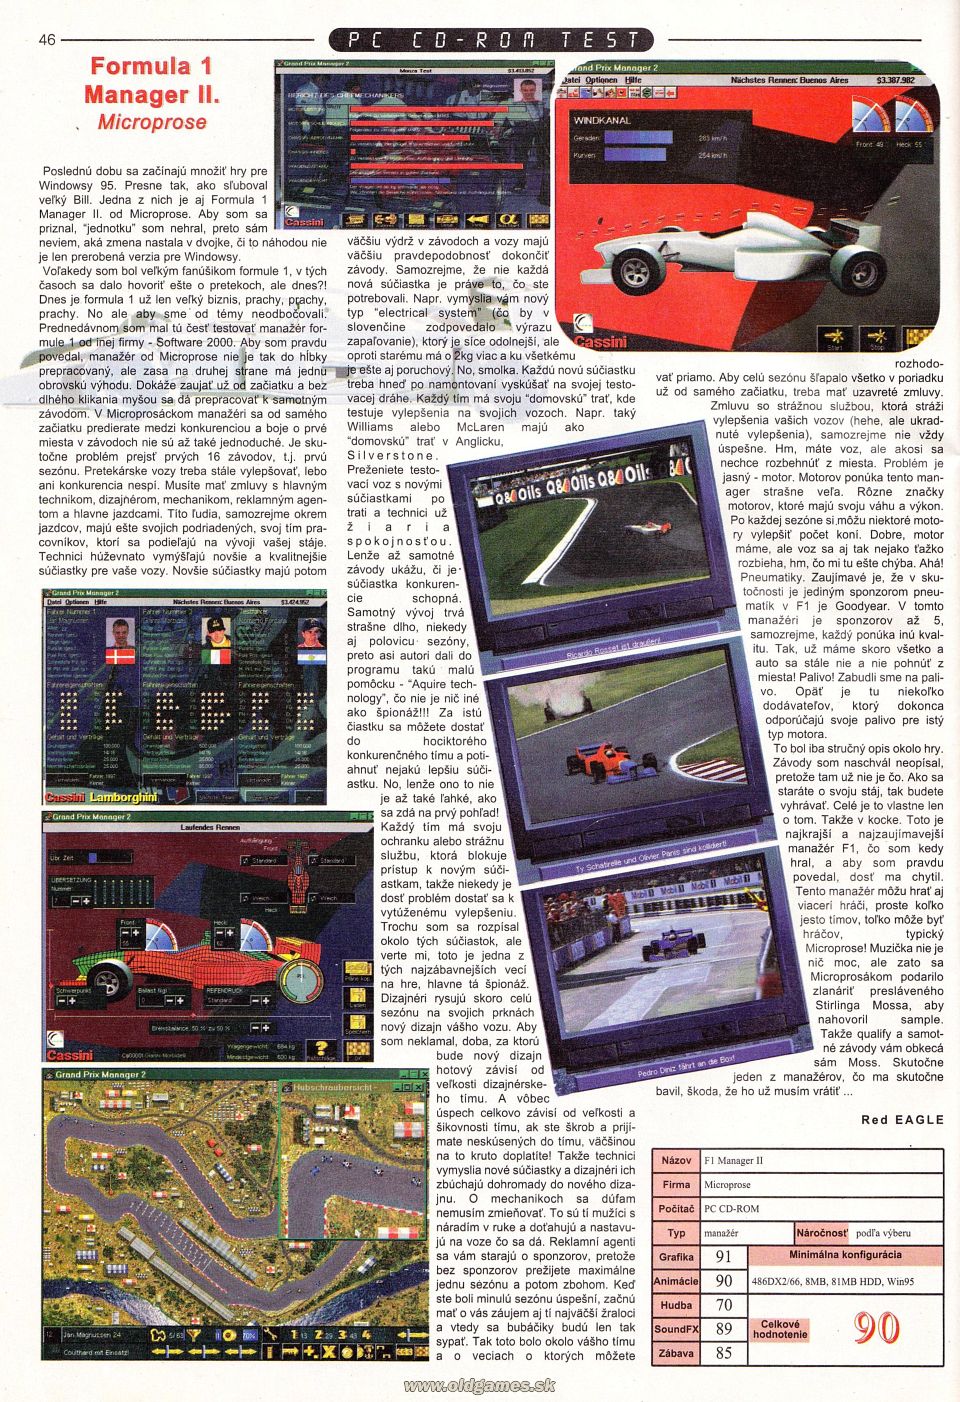 F1 Manager II